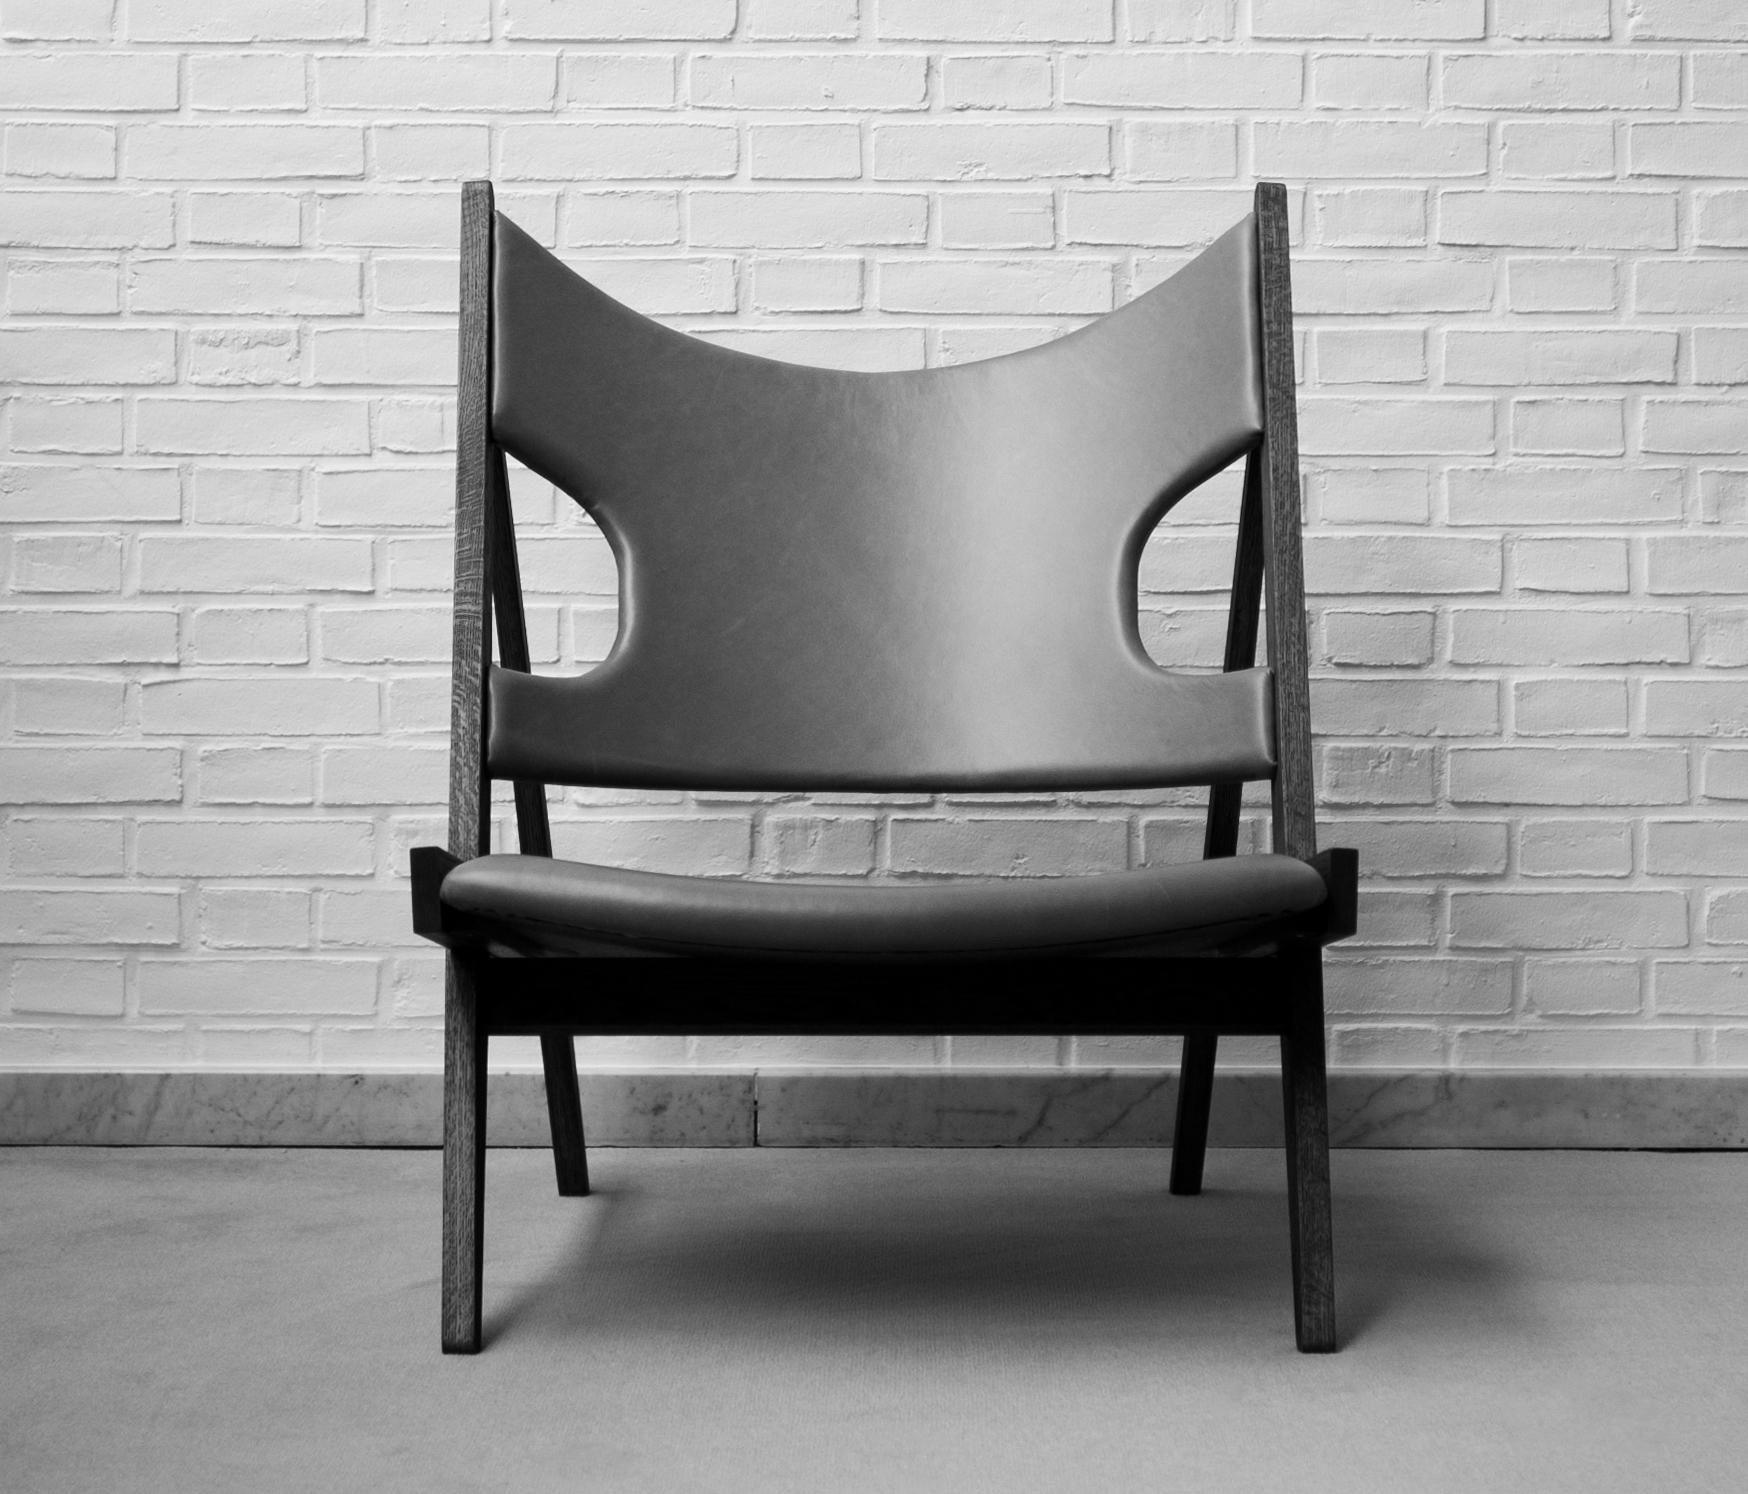 KNITTING CHAIR - Armchairs from MENU | Architonic